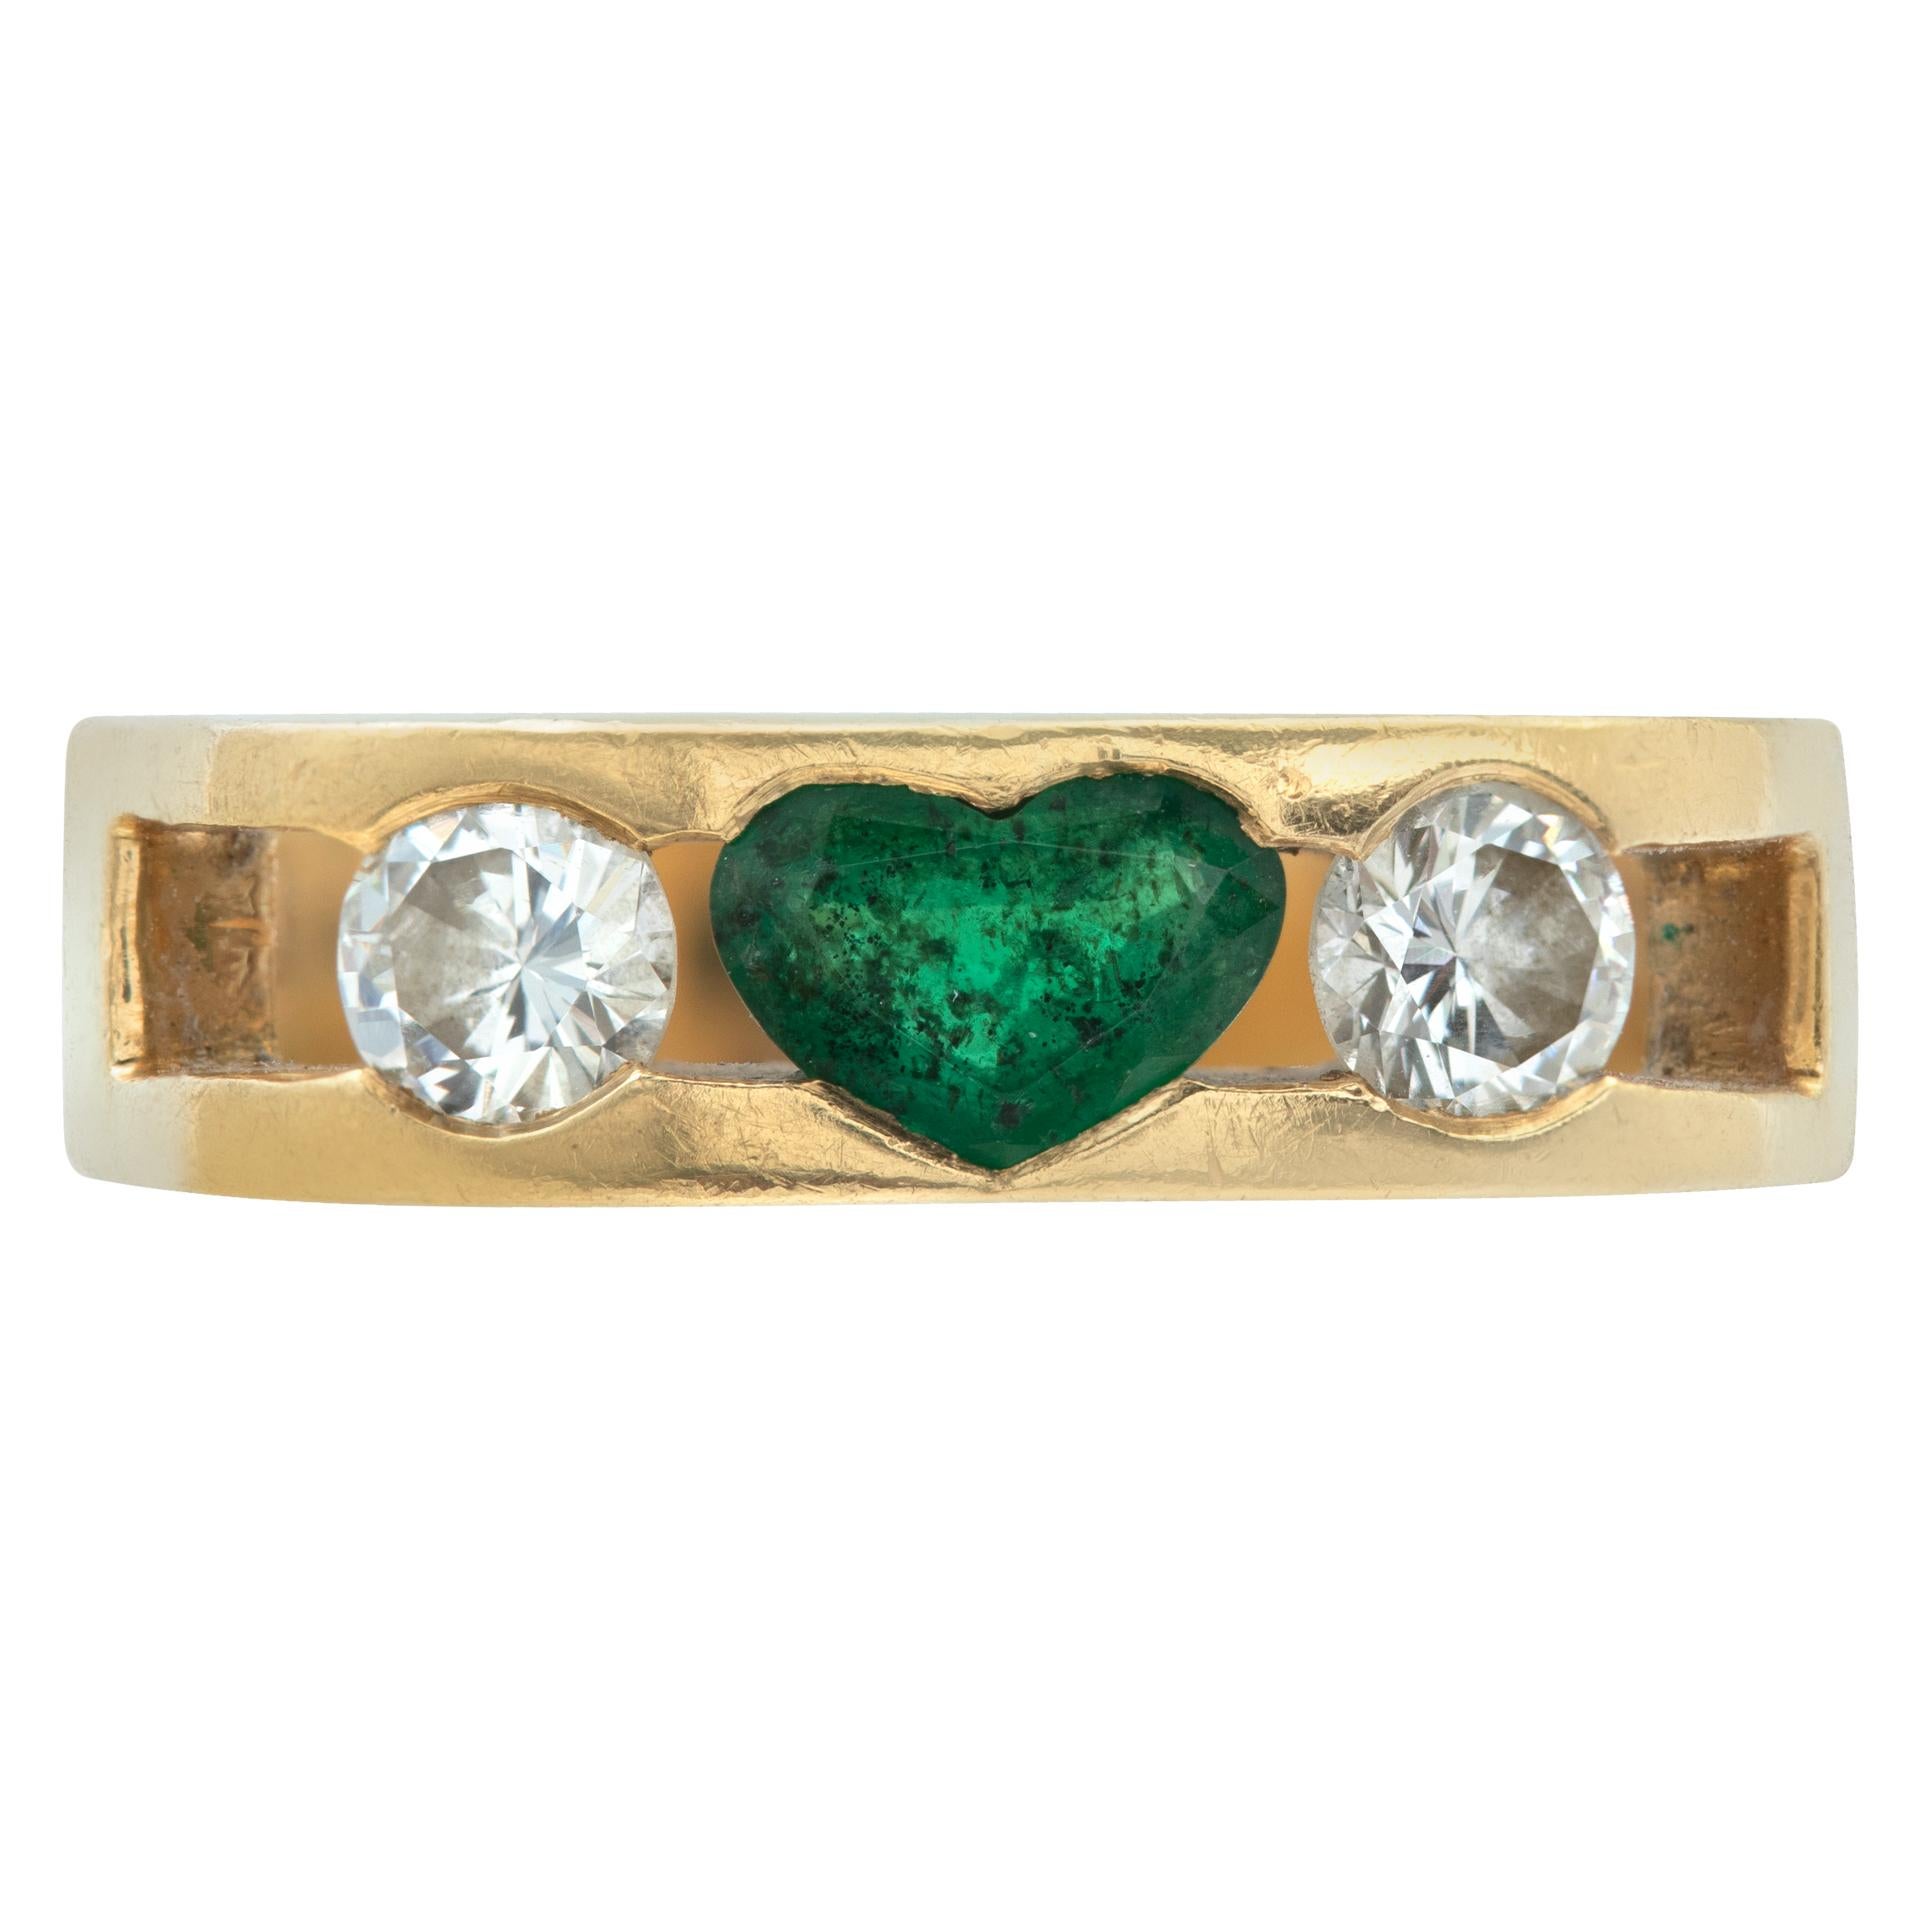 Heart shape emerald & round diamond ring with an aprroixmate 0.50 carat emerald and two approximate 0.20 carat side diamonds set in 18k yellow gold. Size 5.5.

This Diamond/Emerald ring is currently size 5.5 and some items can be sized up or down,